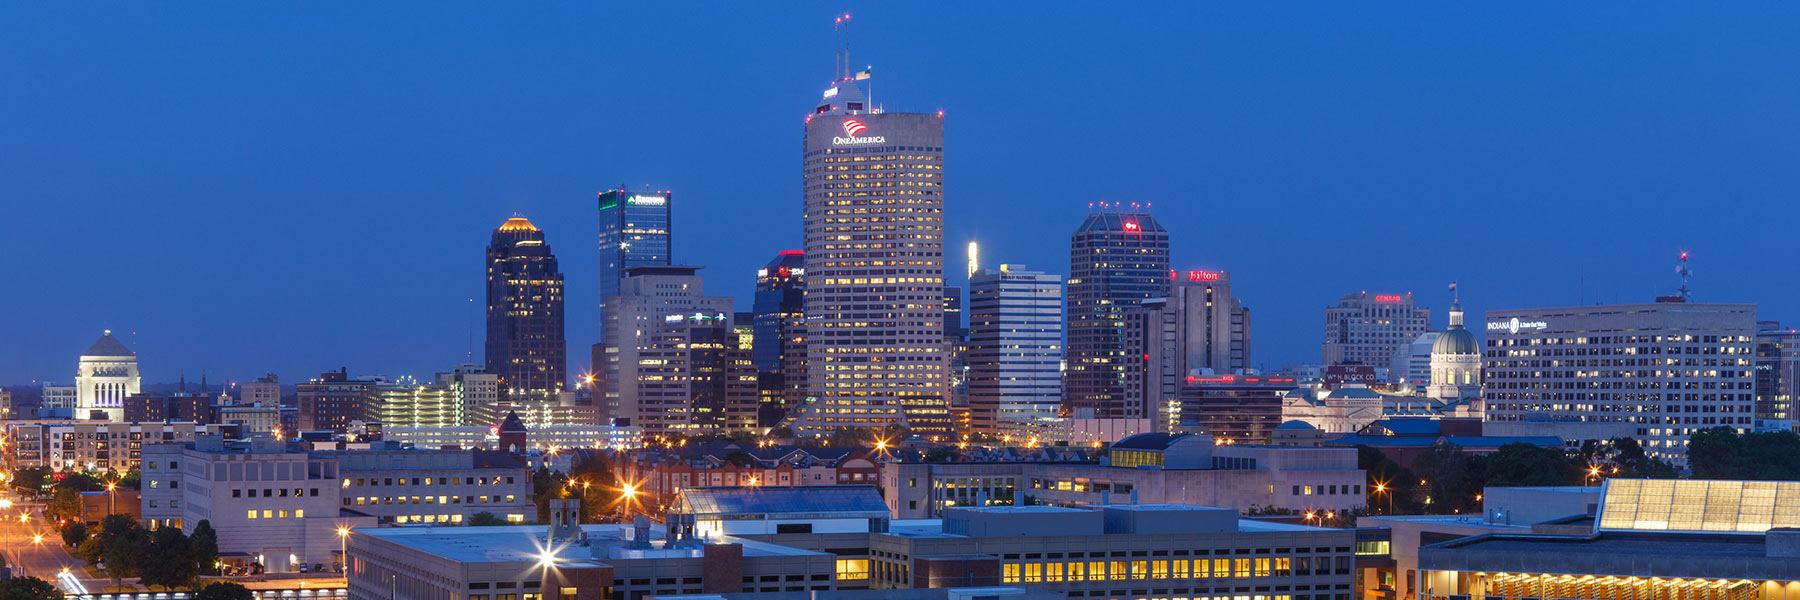 The Indianapolis skyline at night.